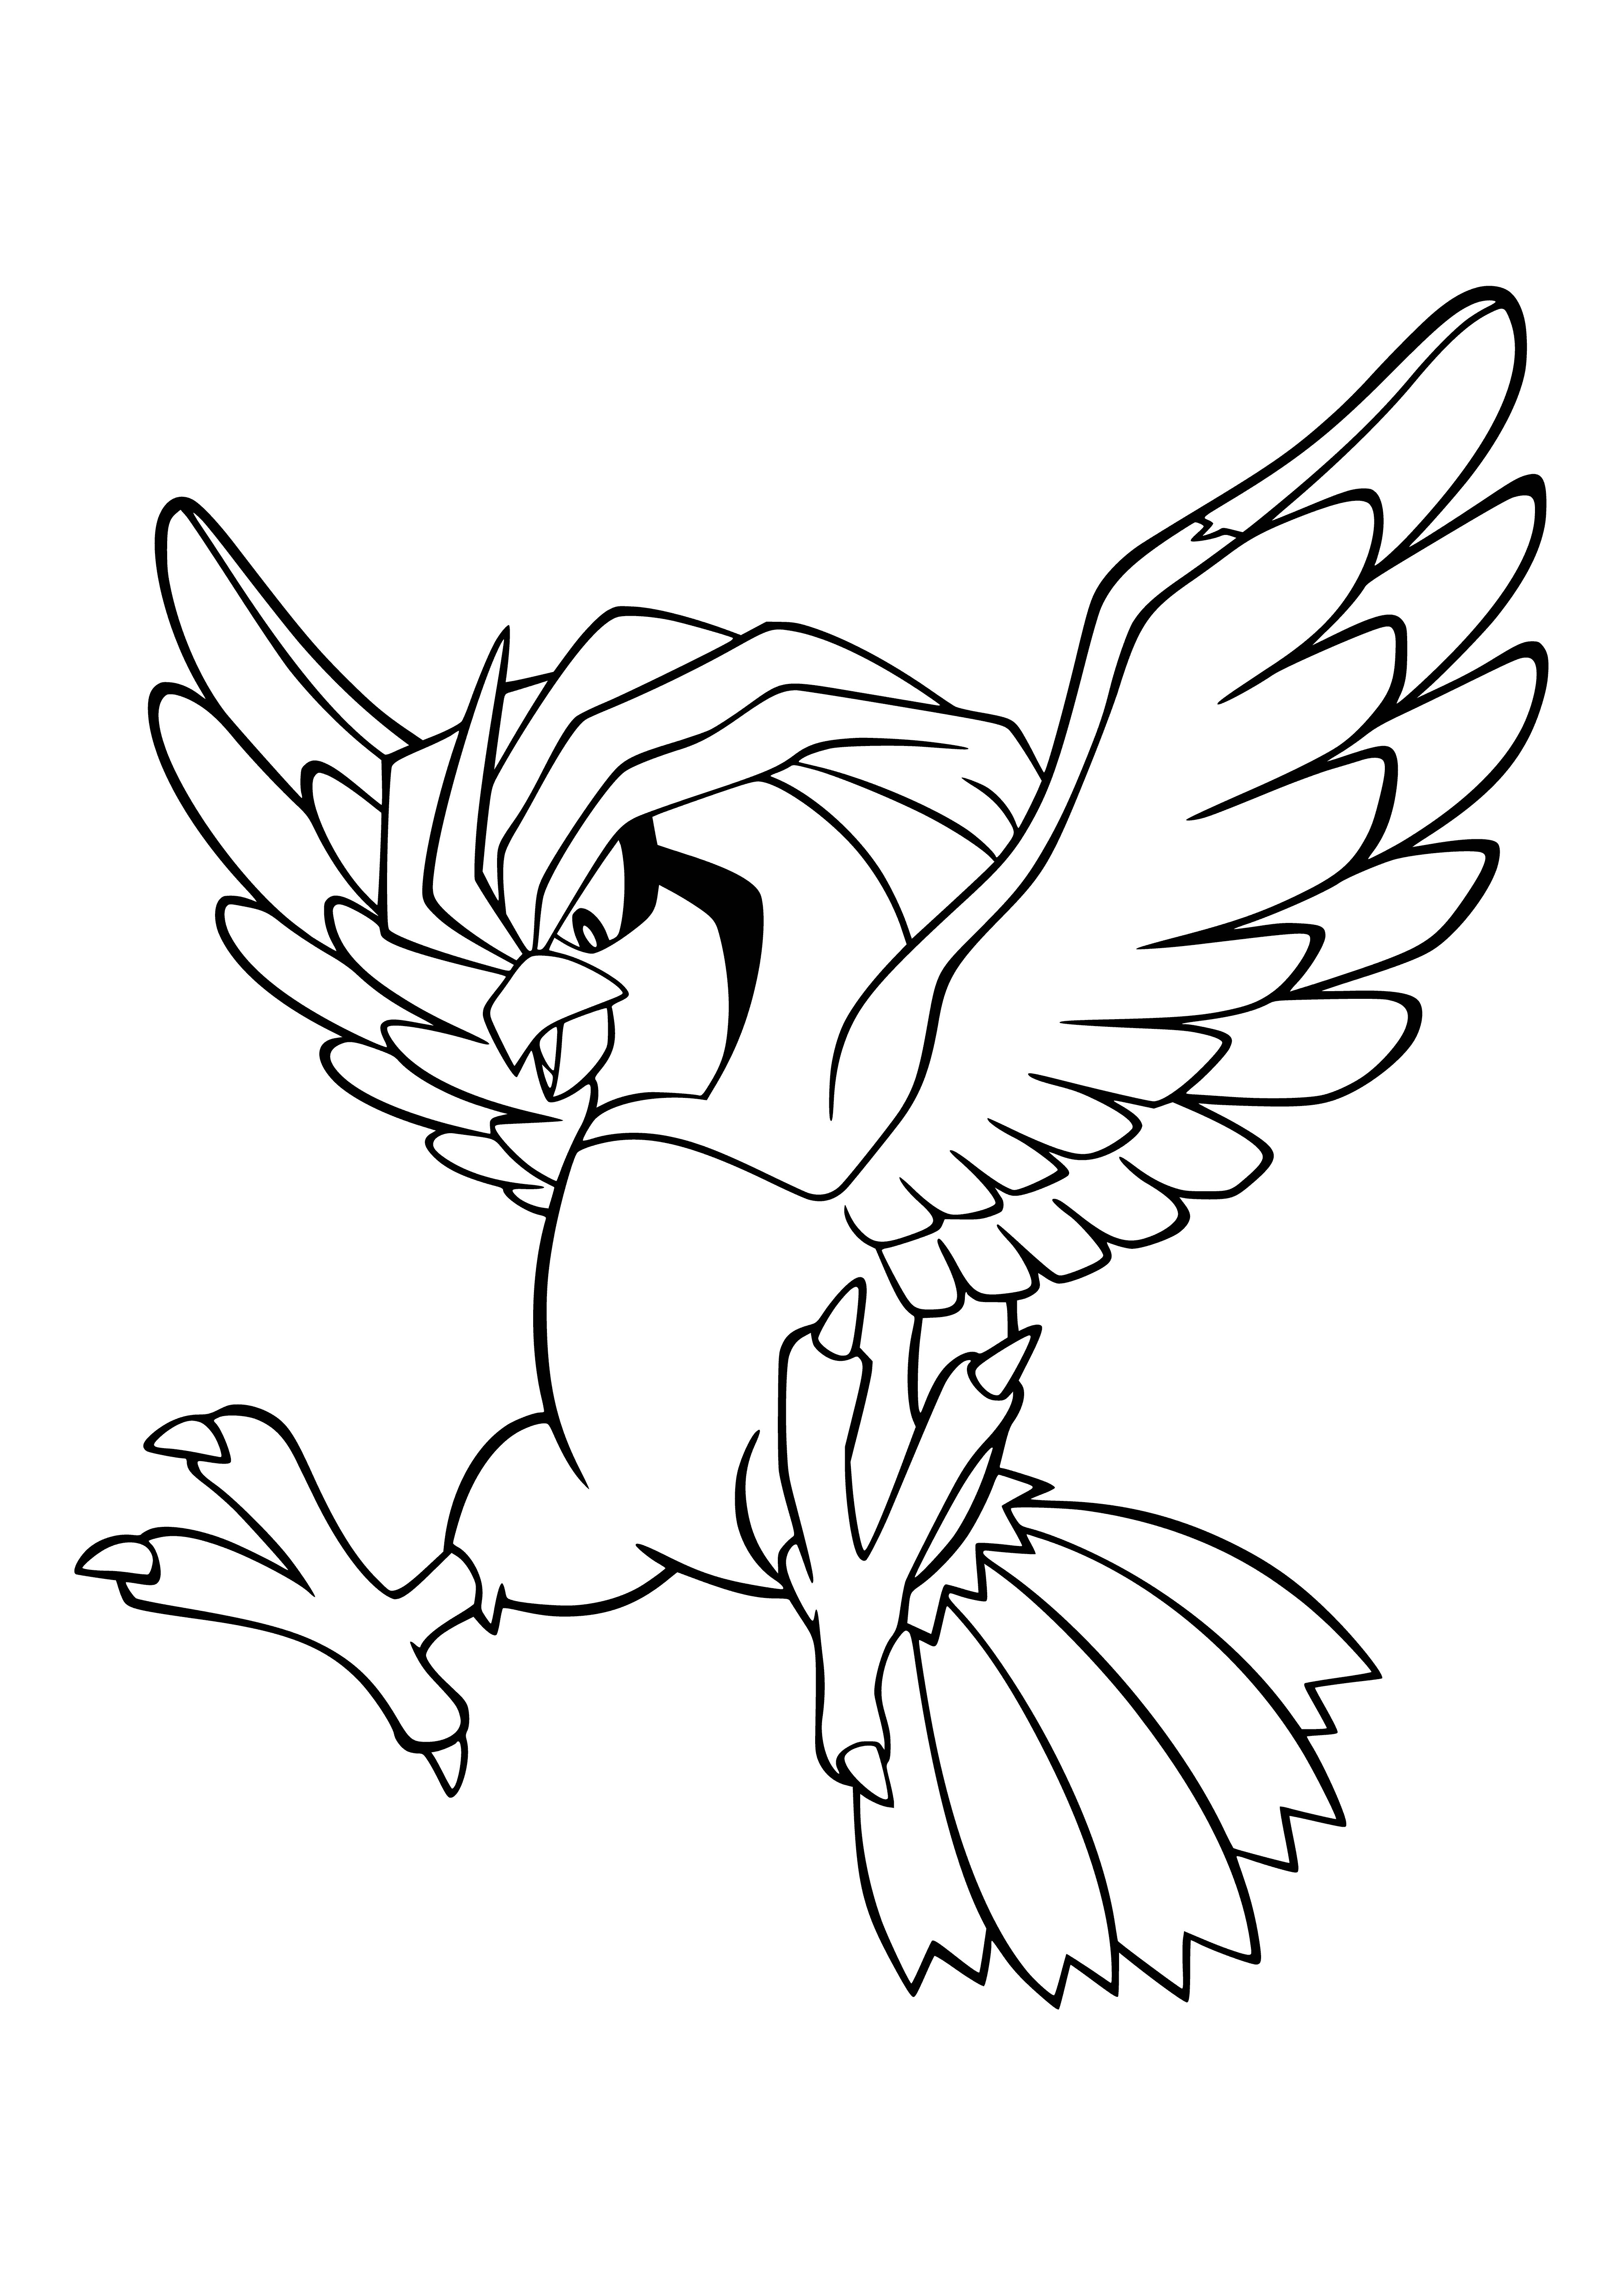 coloring page: Powerful brown bird Pokemon w/long pointed beak & small red feathers on its head. Small black eyes & powerful wings.